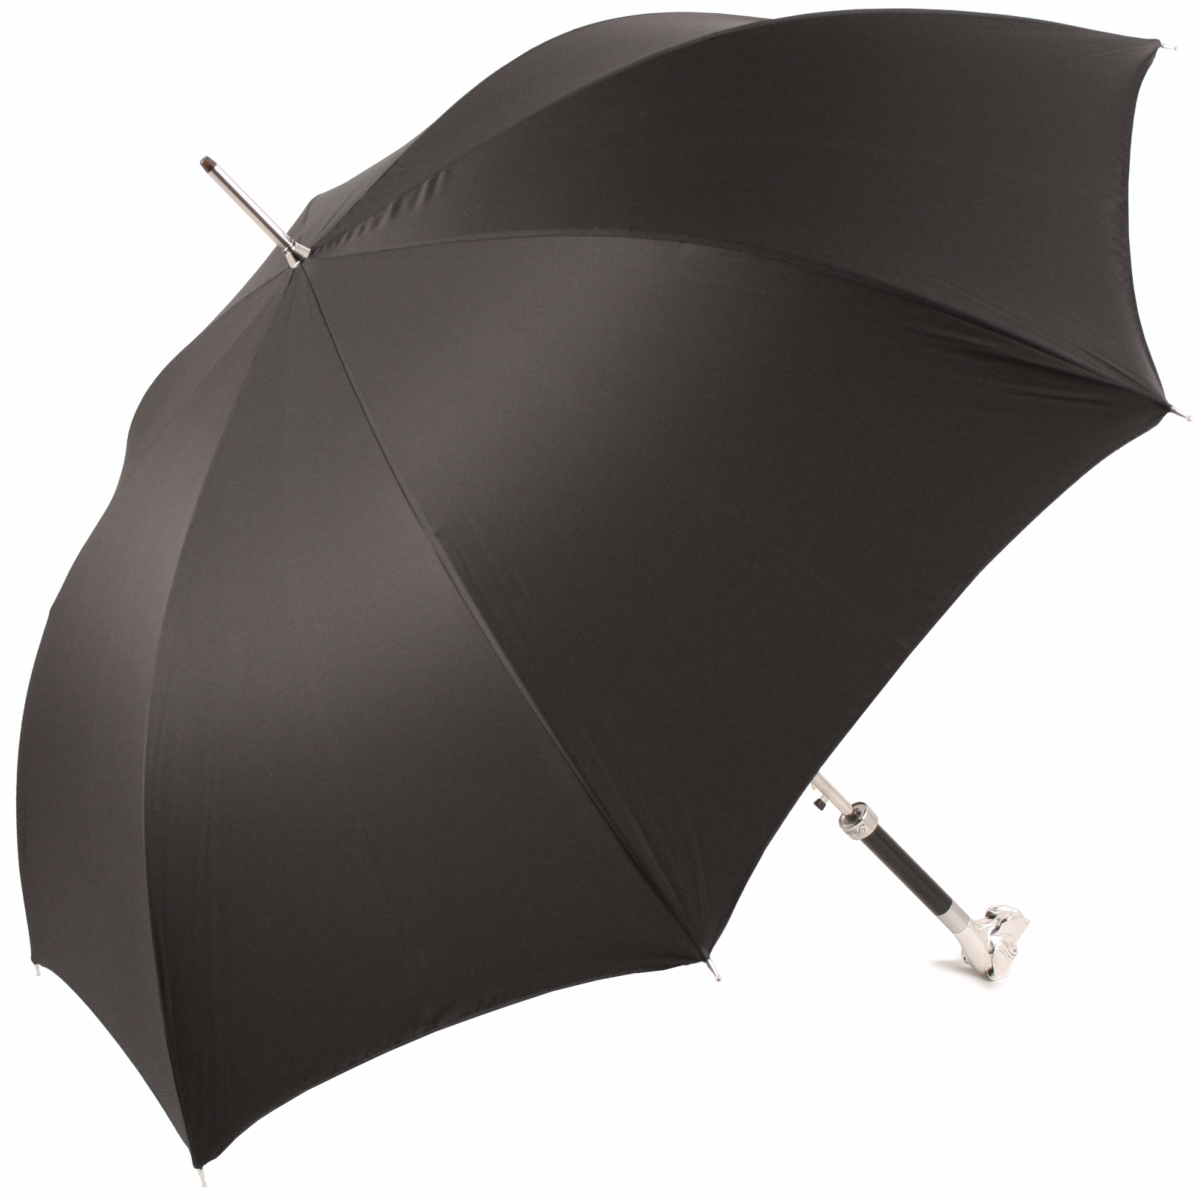 Luxury Gents Umbrella with Chrome Hound Handle by Pasotti